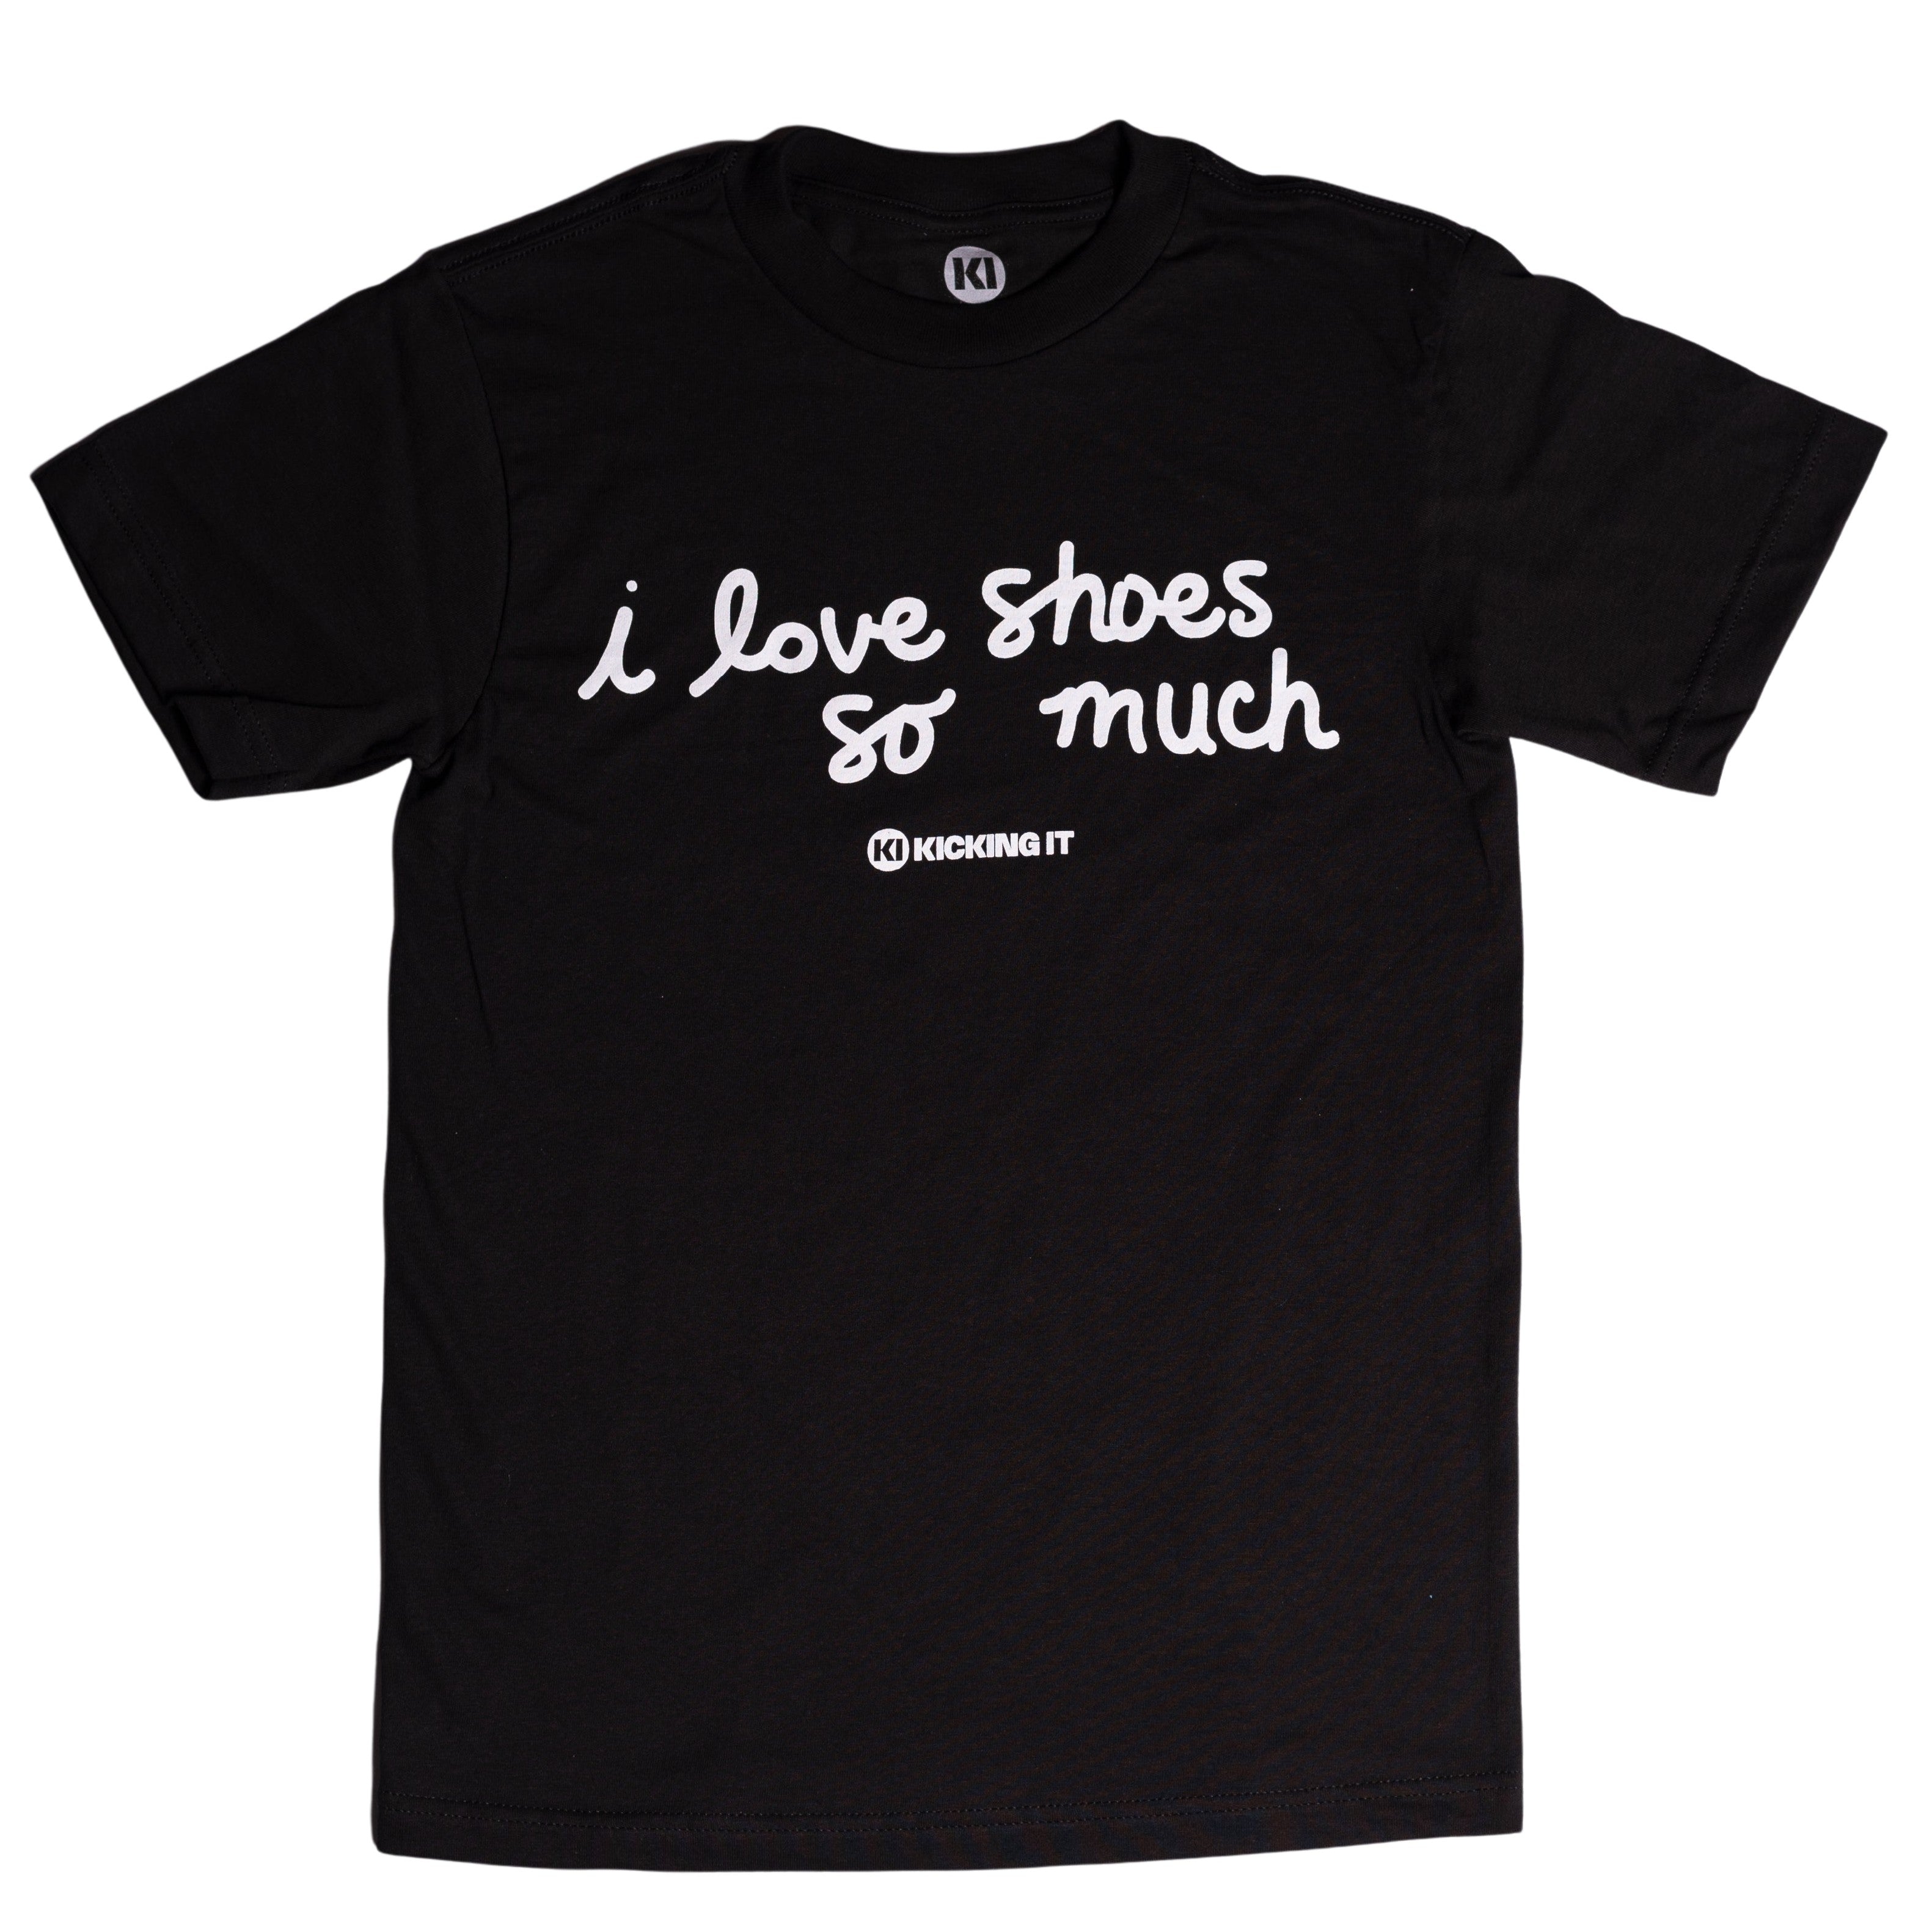 I Love Shoes So Much Tee (Black/Wht)